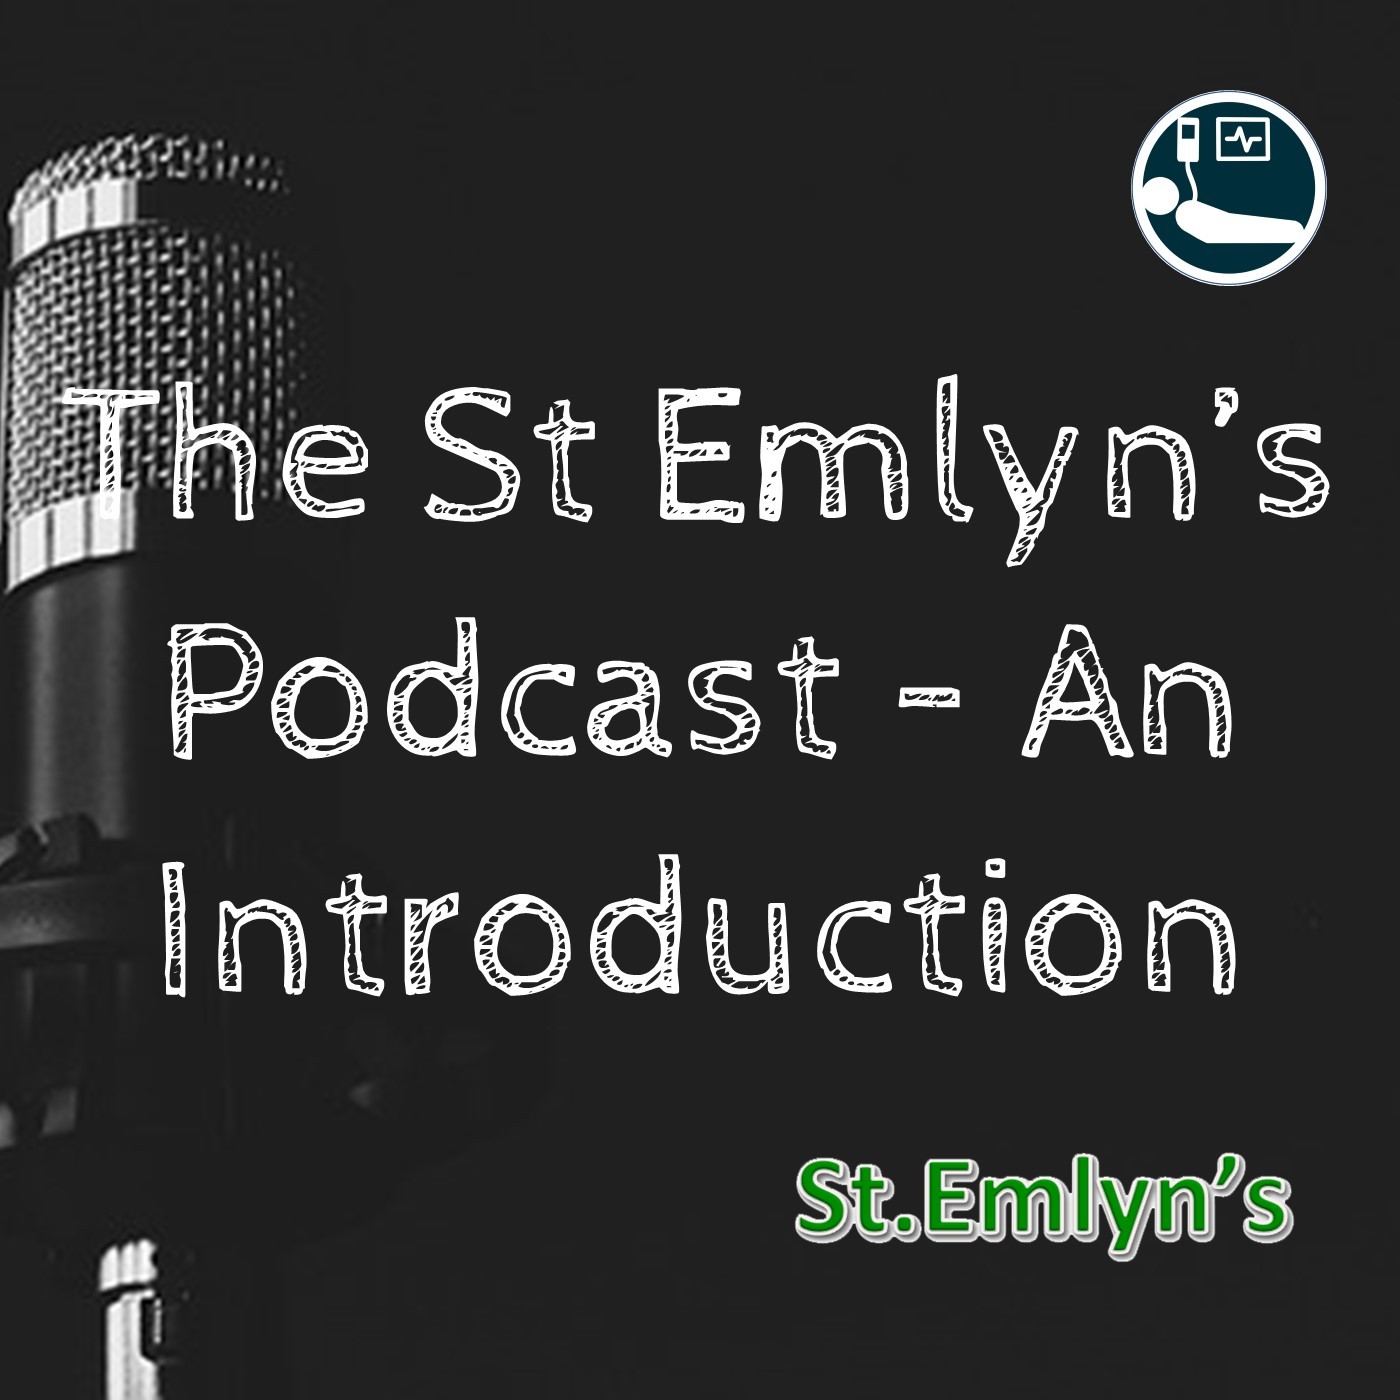 Ep 1 - St.Emlyn's The Podcast - An Introduction